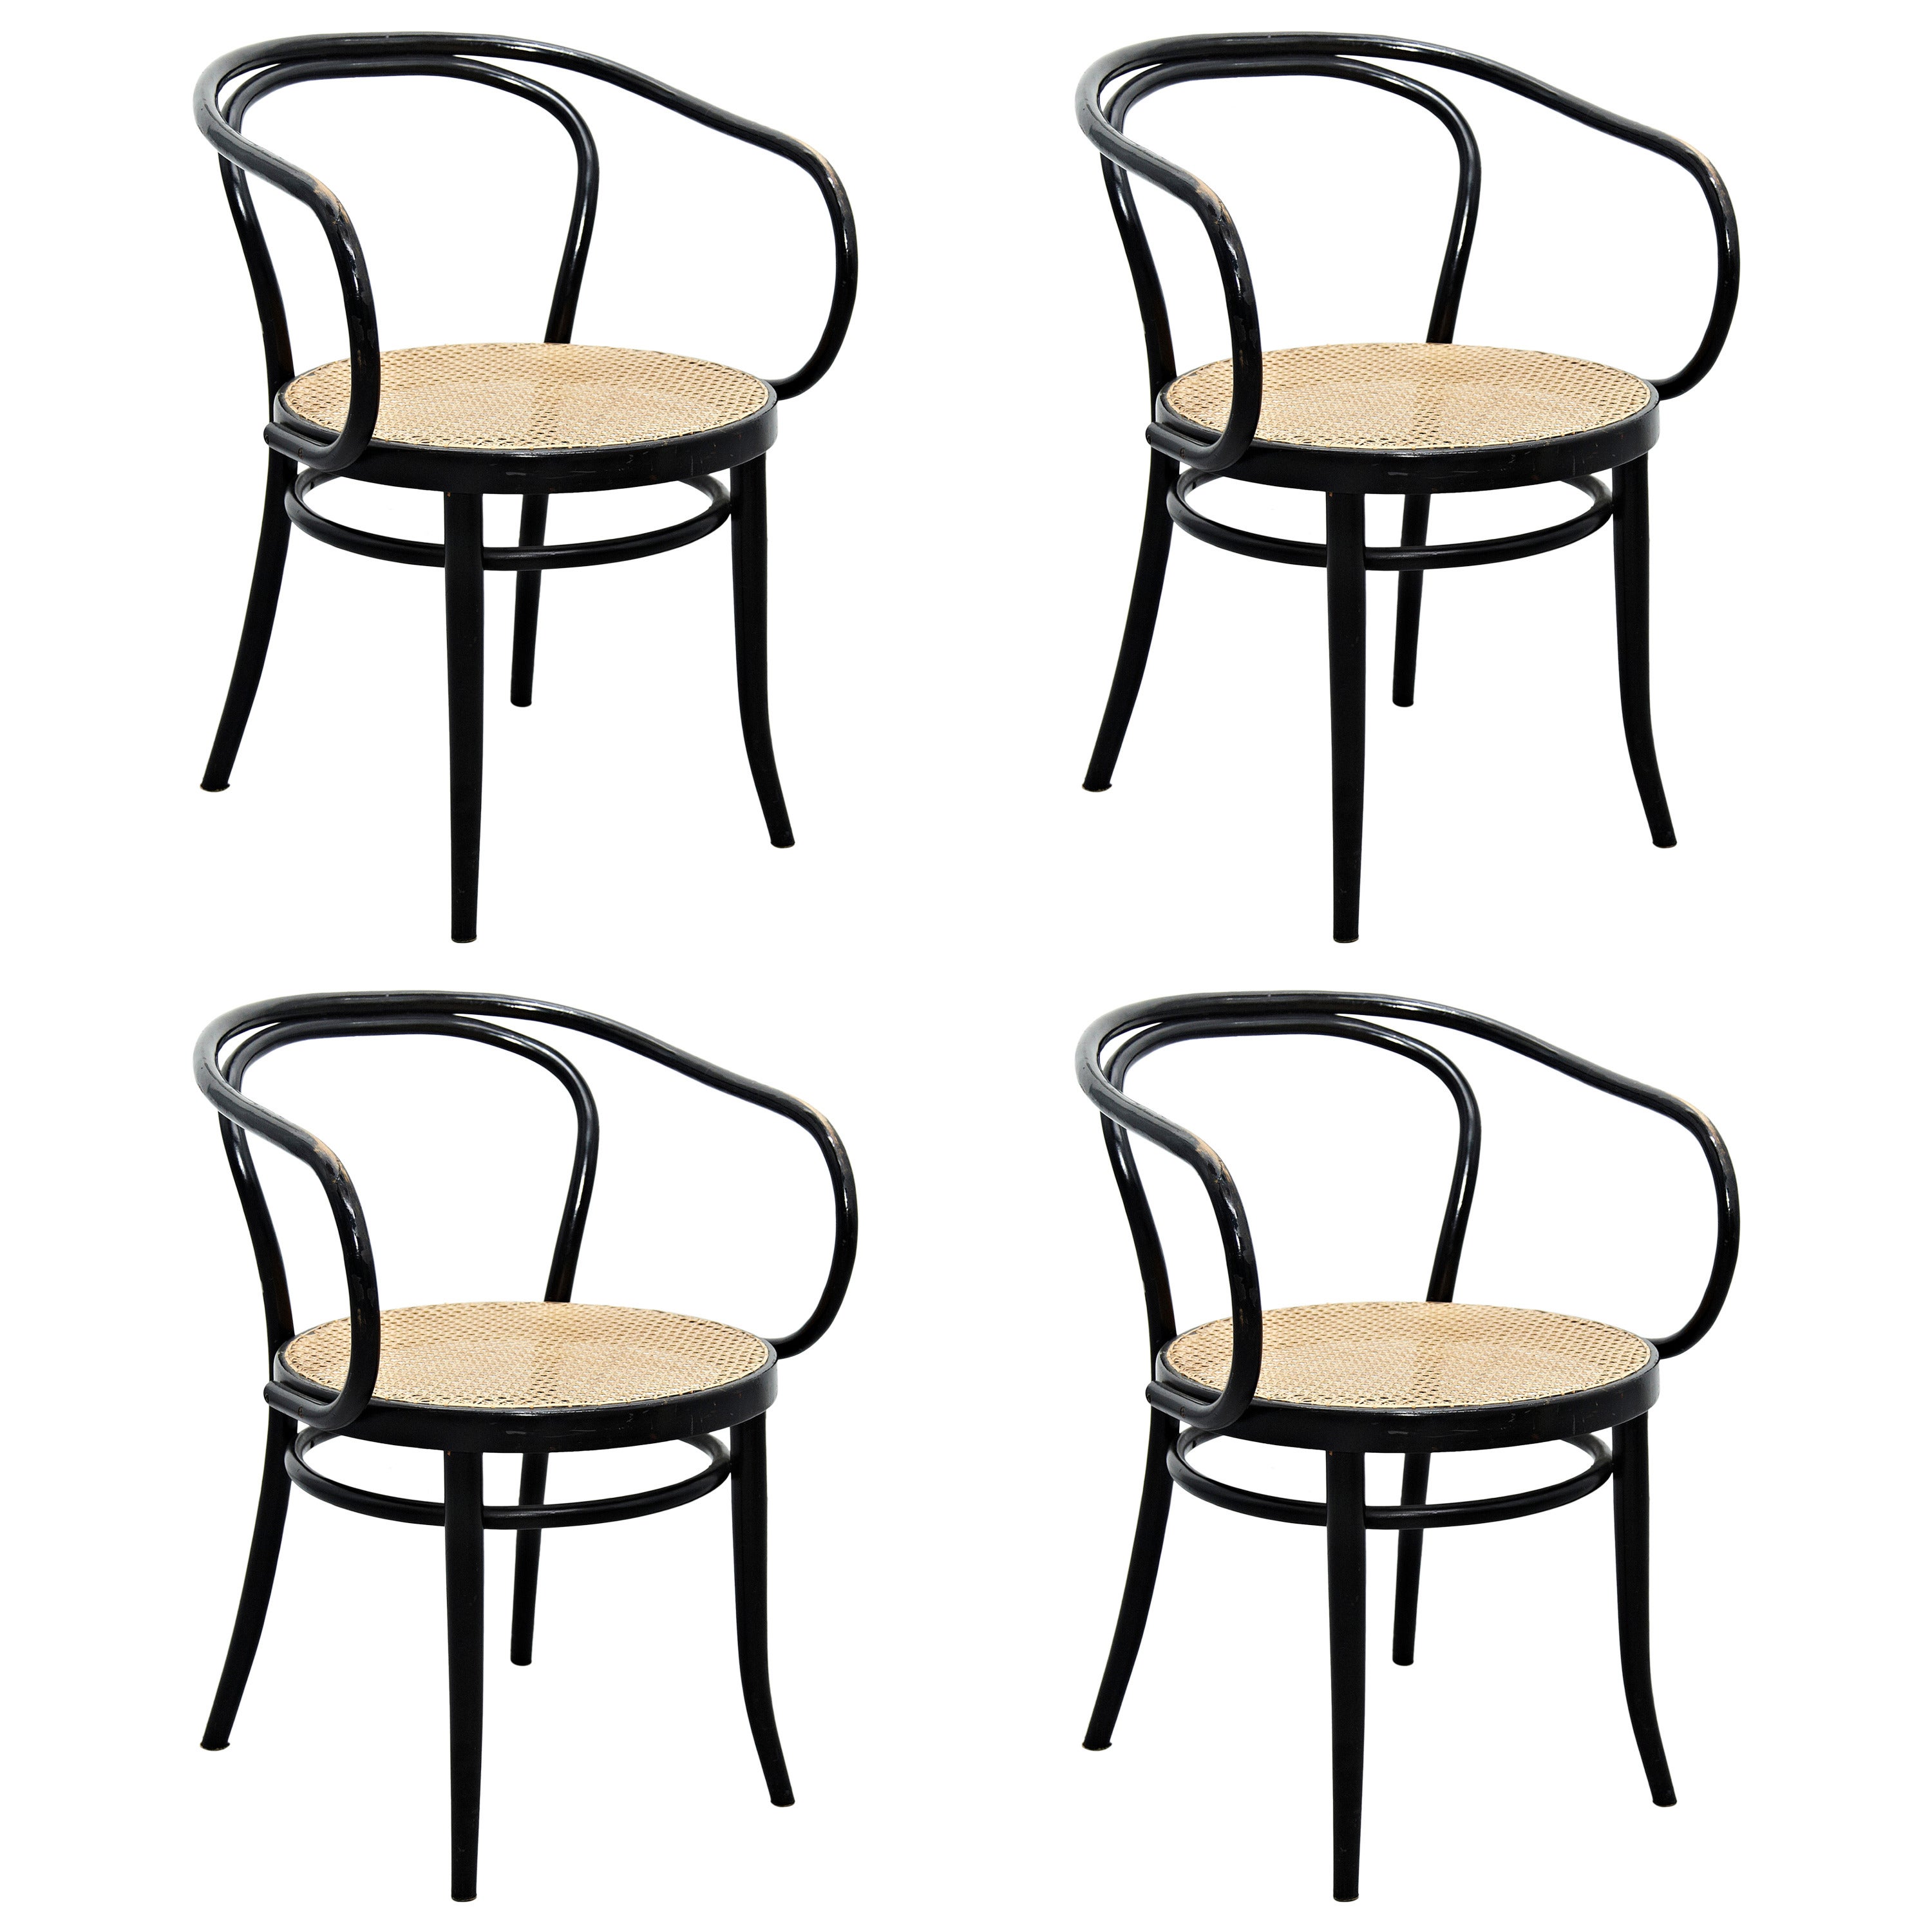 Set of Four Thonet 209 Armchair by Auguste Thonet for Thonet, circa 1900